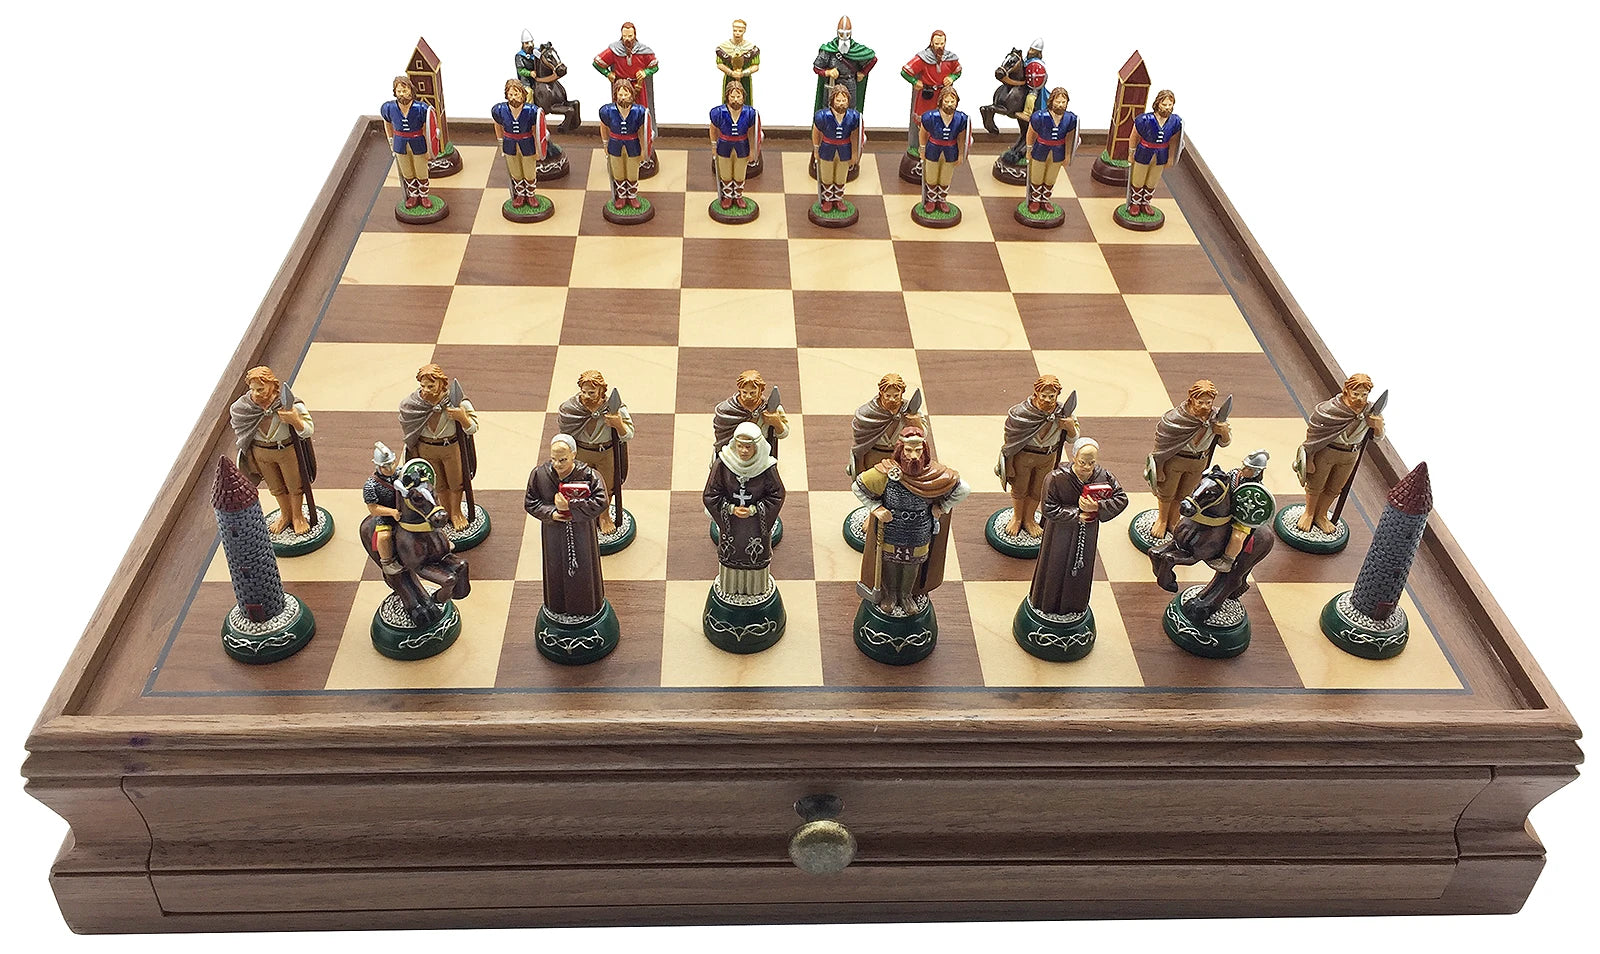 Toy soldier miniature army men Battle of Clontarf Chess Set.